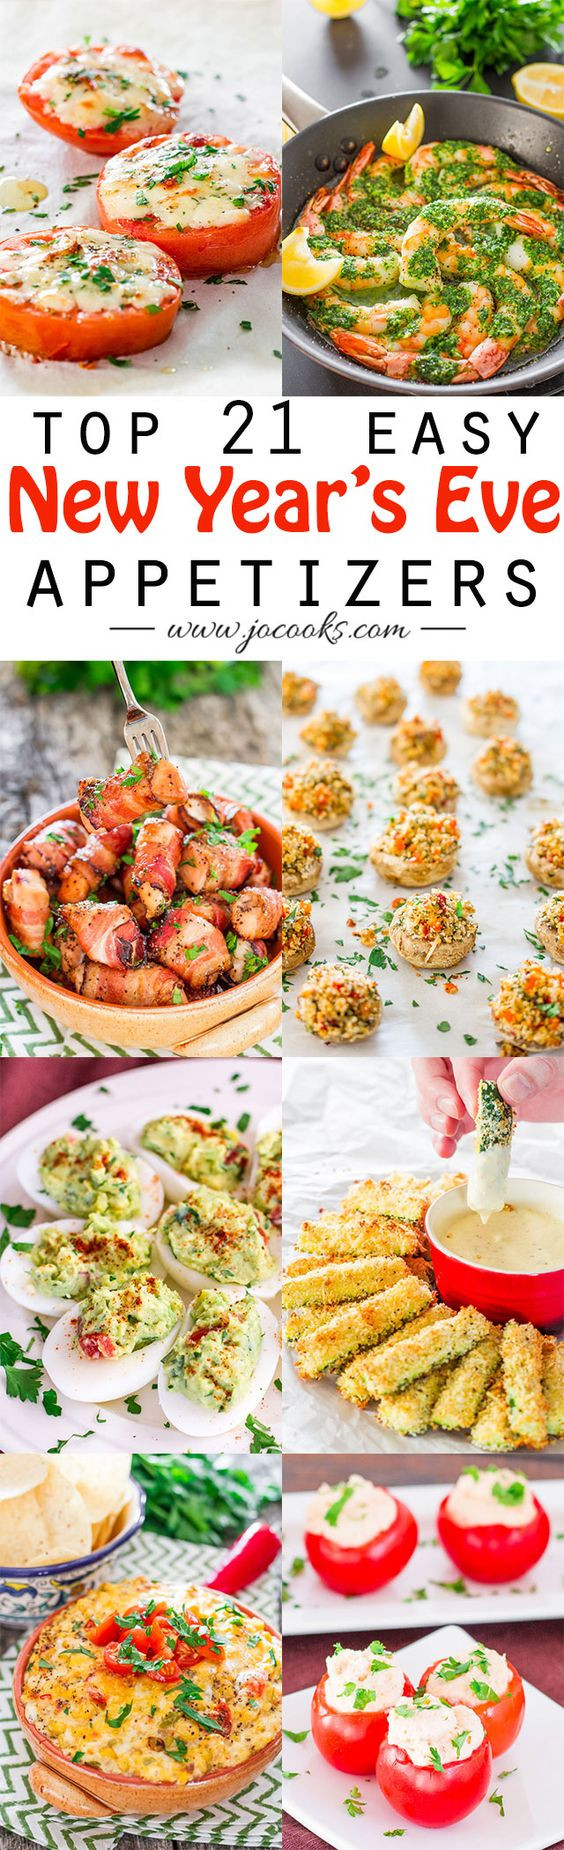 Best Appetizers For New Years Eve Parties
 Buttons and Bows online The Best Ideas to Make for a